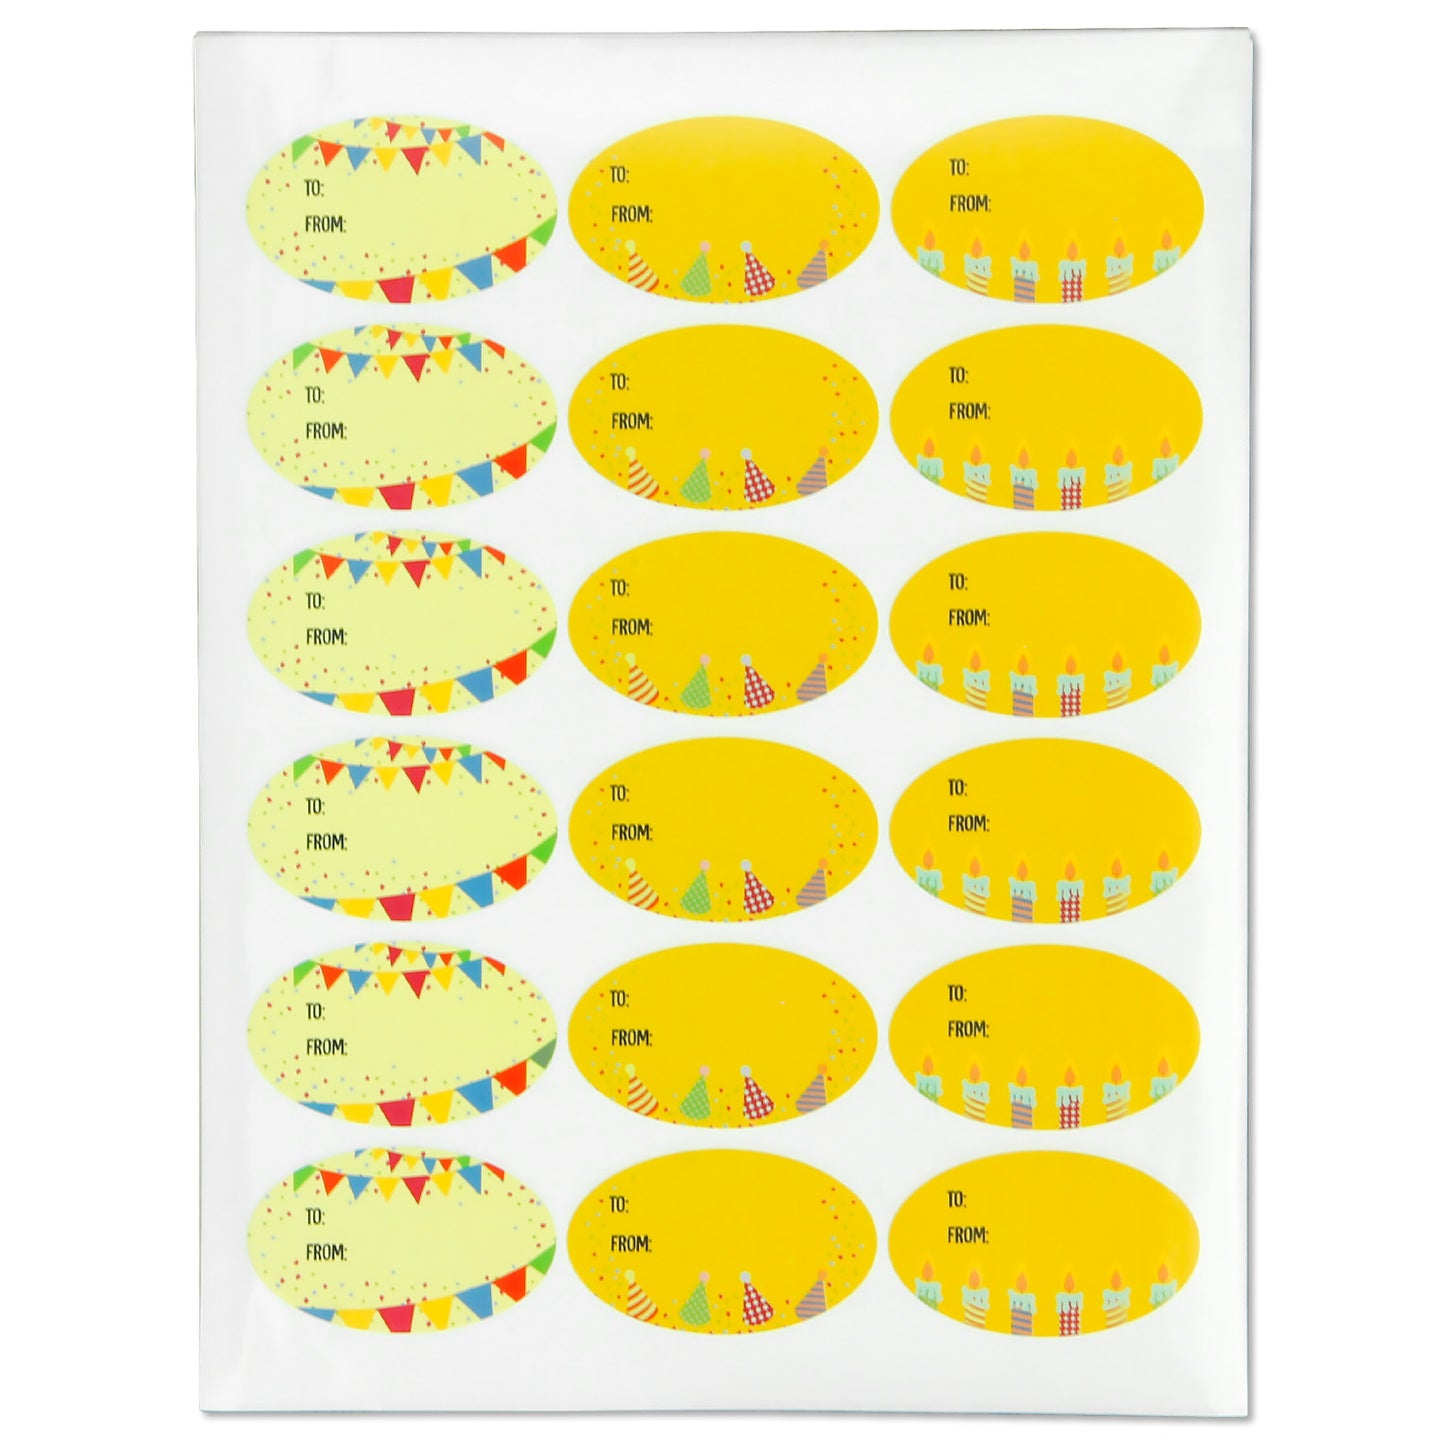 2.5 x 1.5 inch | Yellow Birthday Gift Tag Stickers (3 Designs)